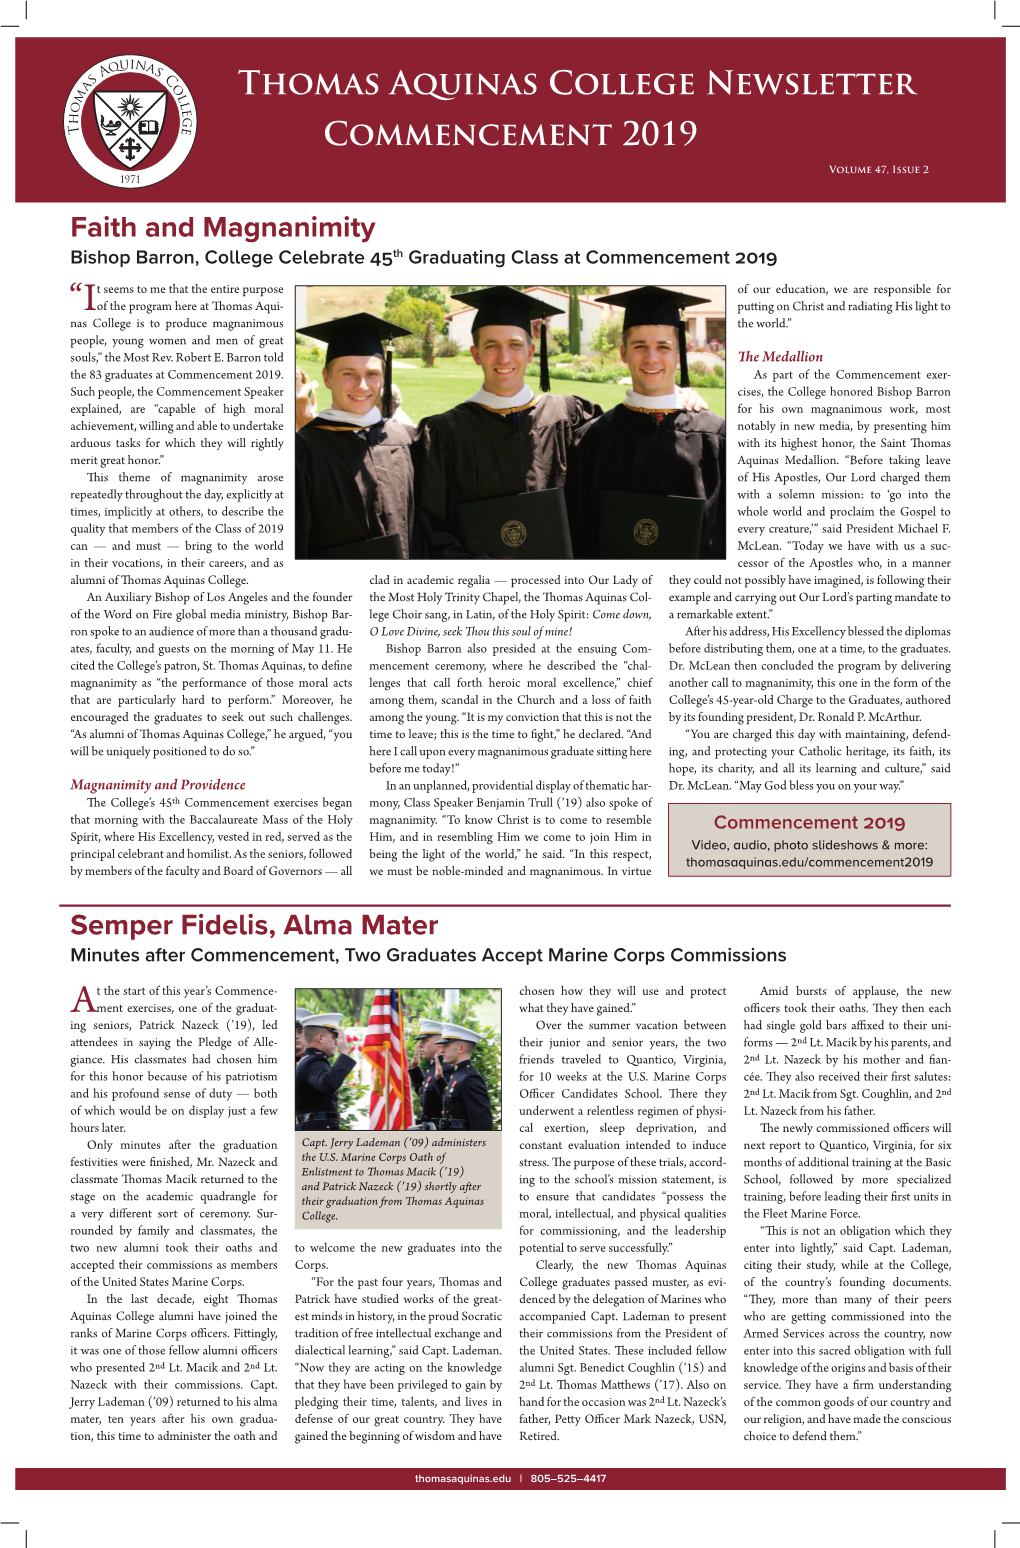 Thomas Aquinas College Newsletter Commencement 2019